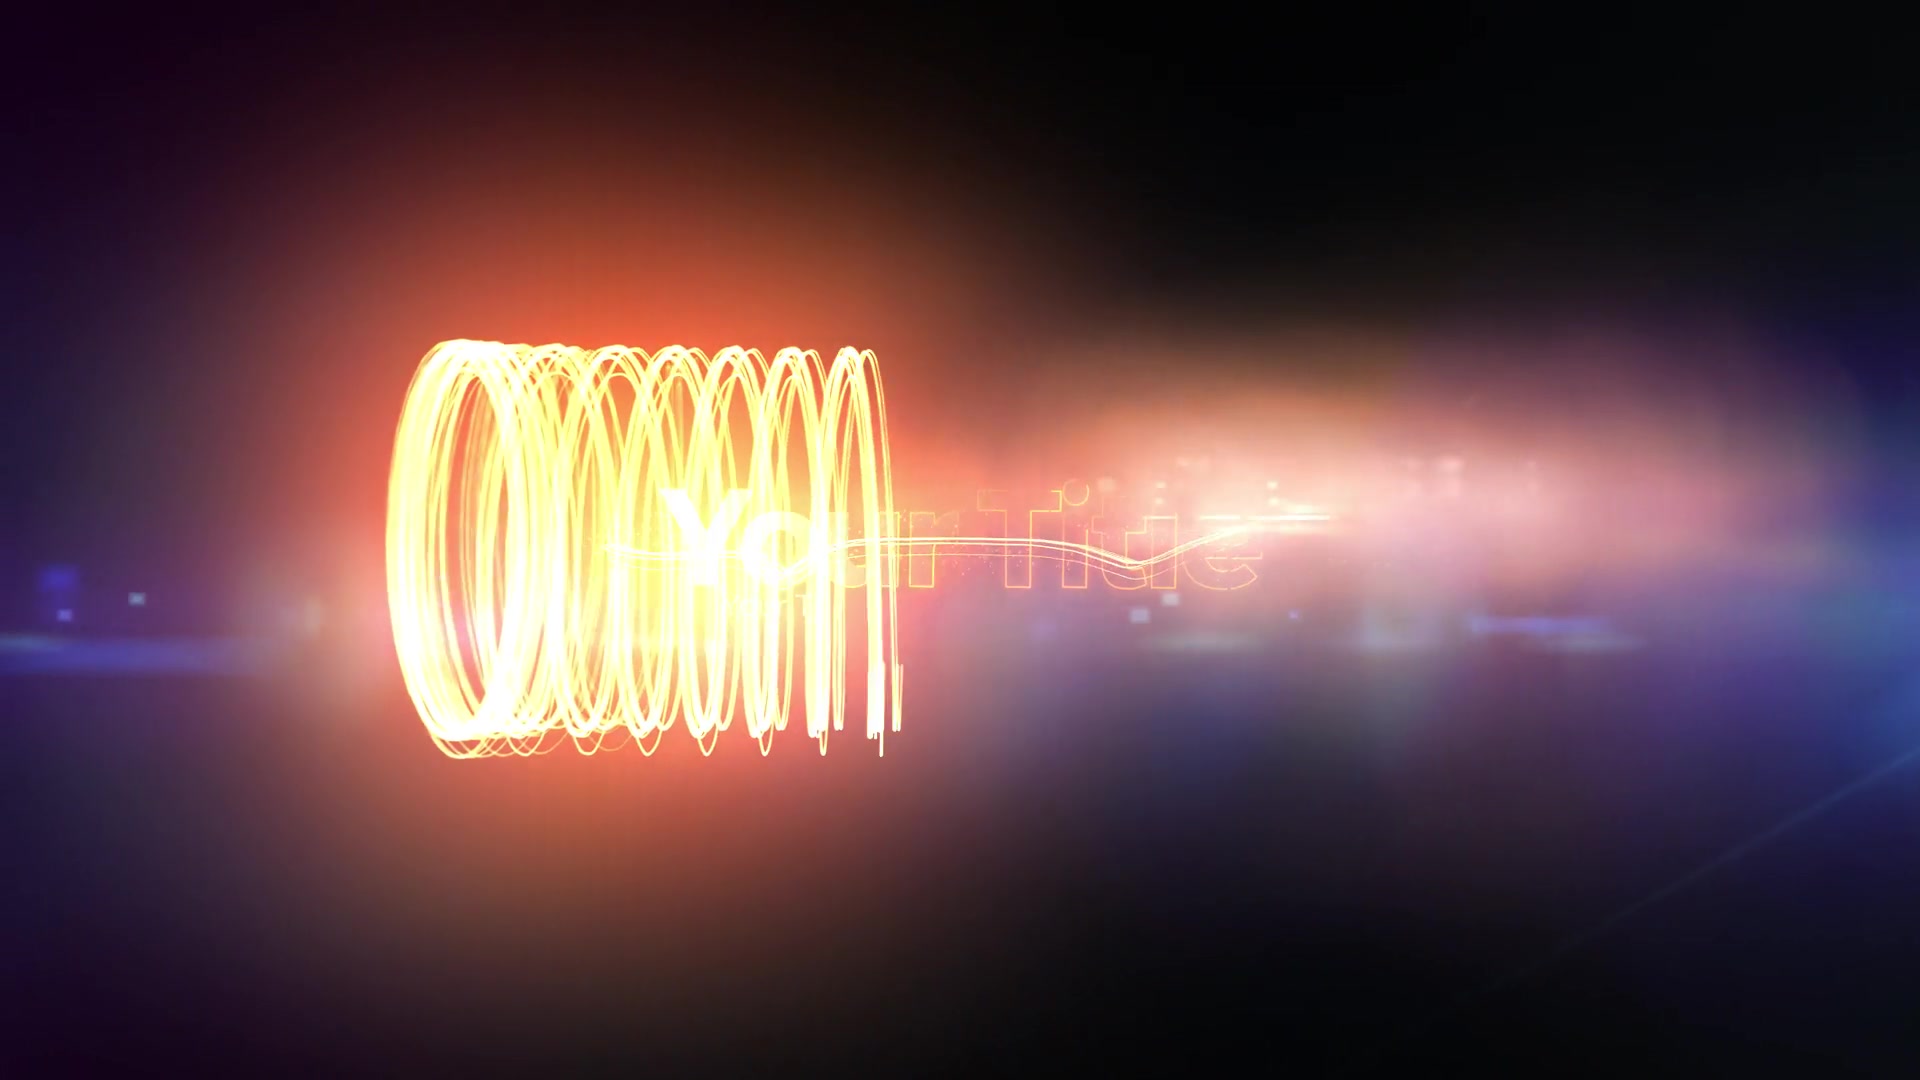 Charging Streaks Title - Download Videohive 22530966